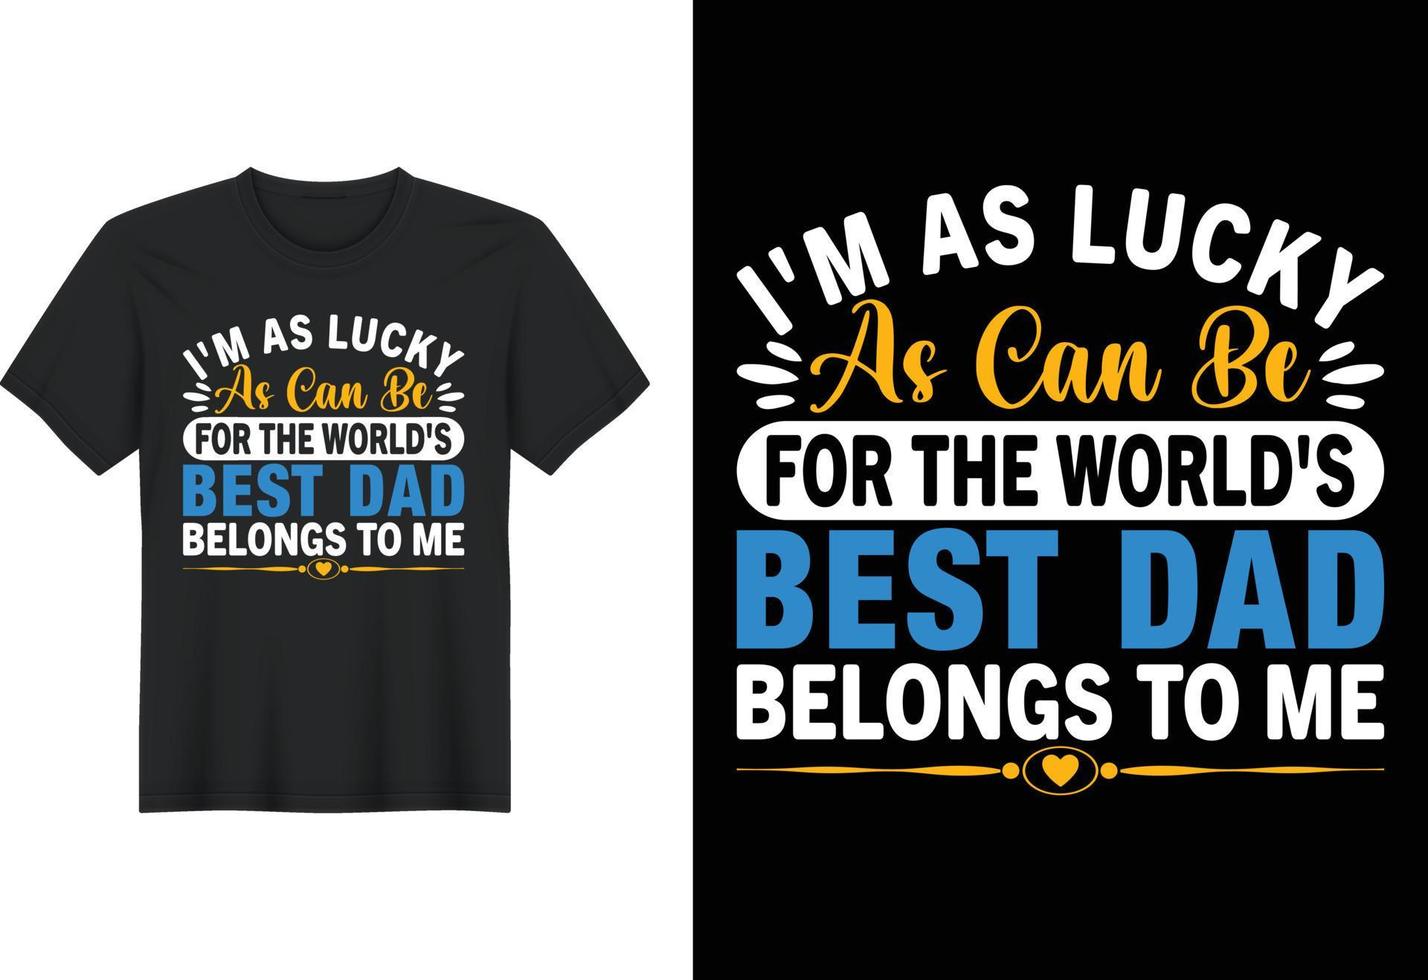 I'm As Lucky As Can Be For The World's Best Dad Belongs To Me, T Shirt Design, Father's Day T-Shirt Design vector